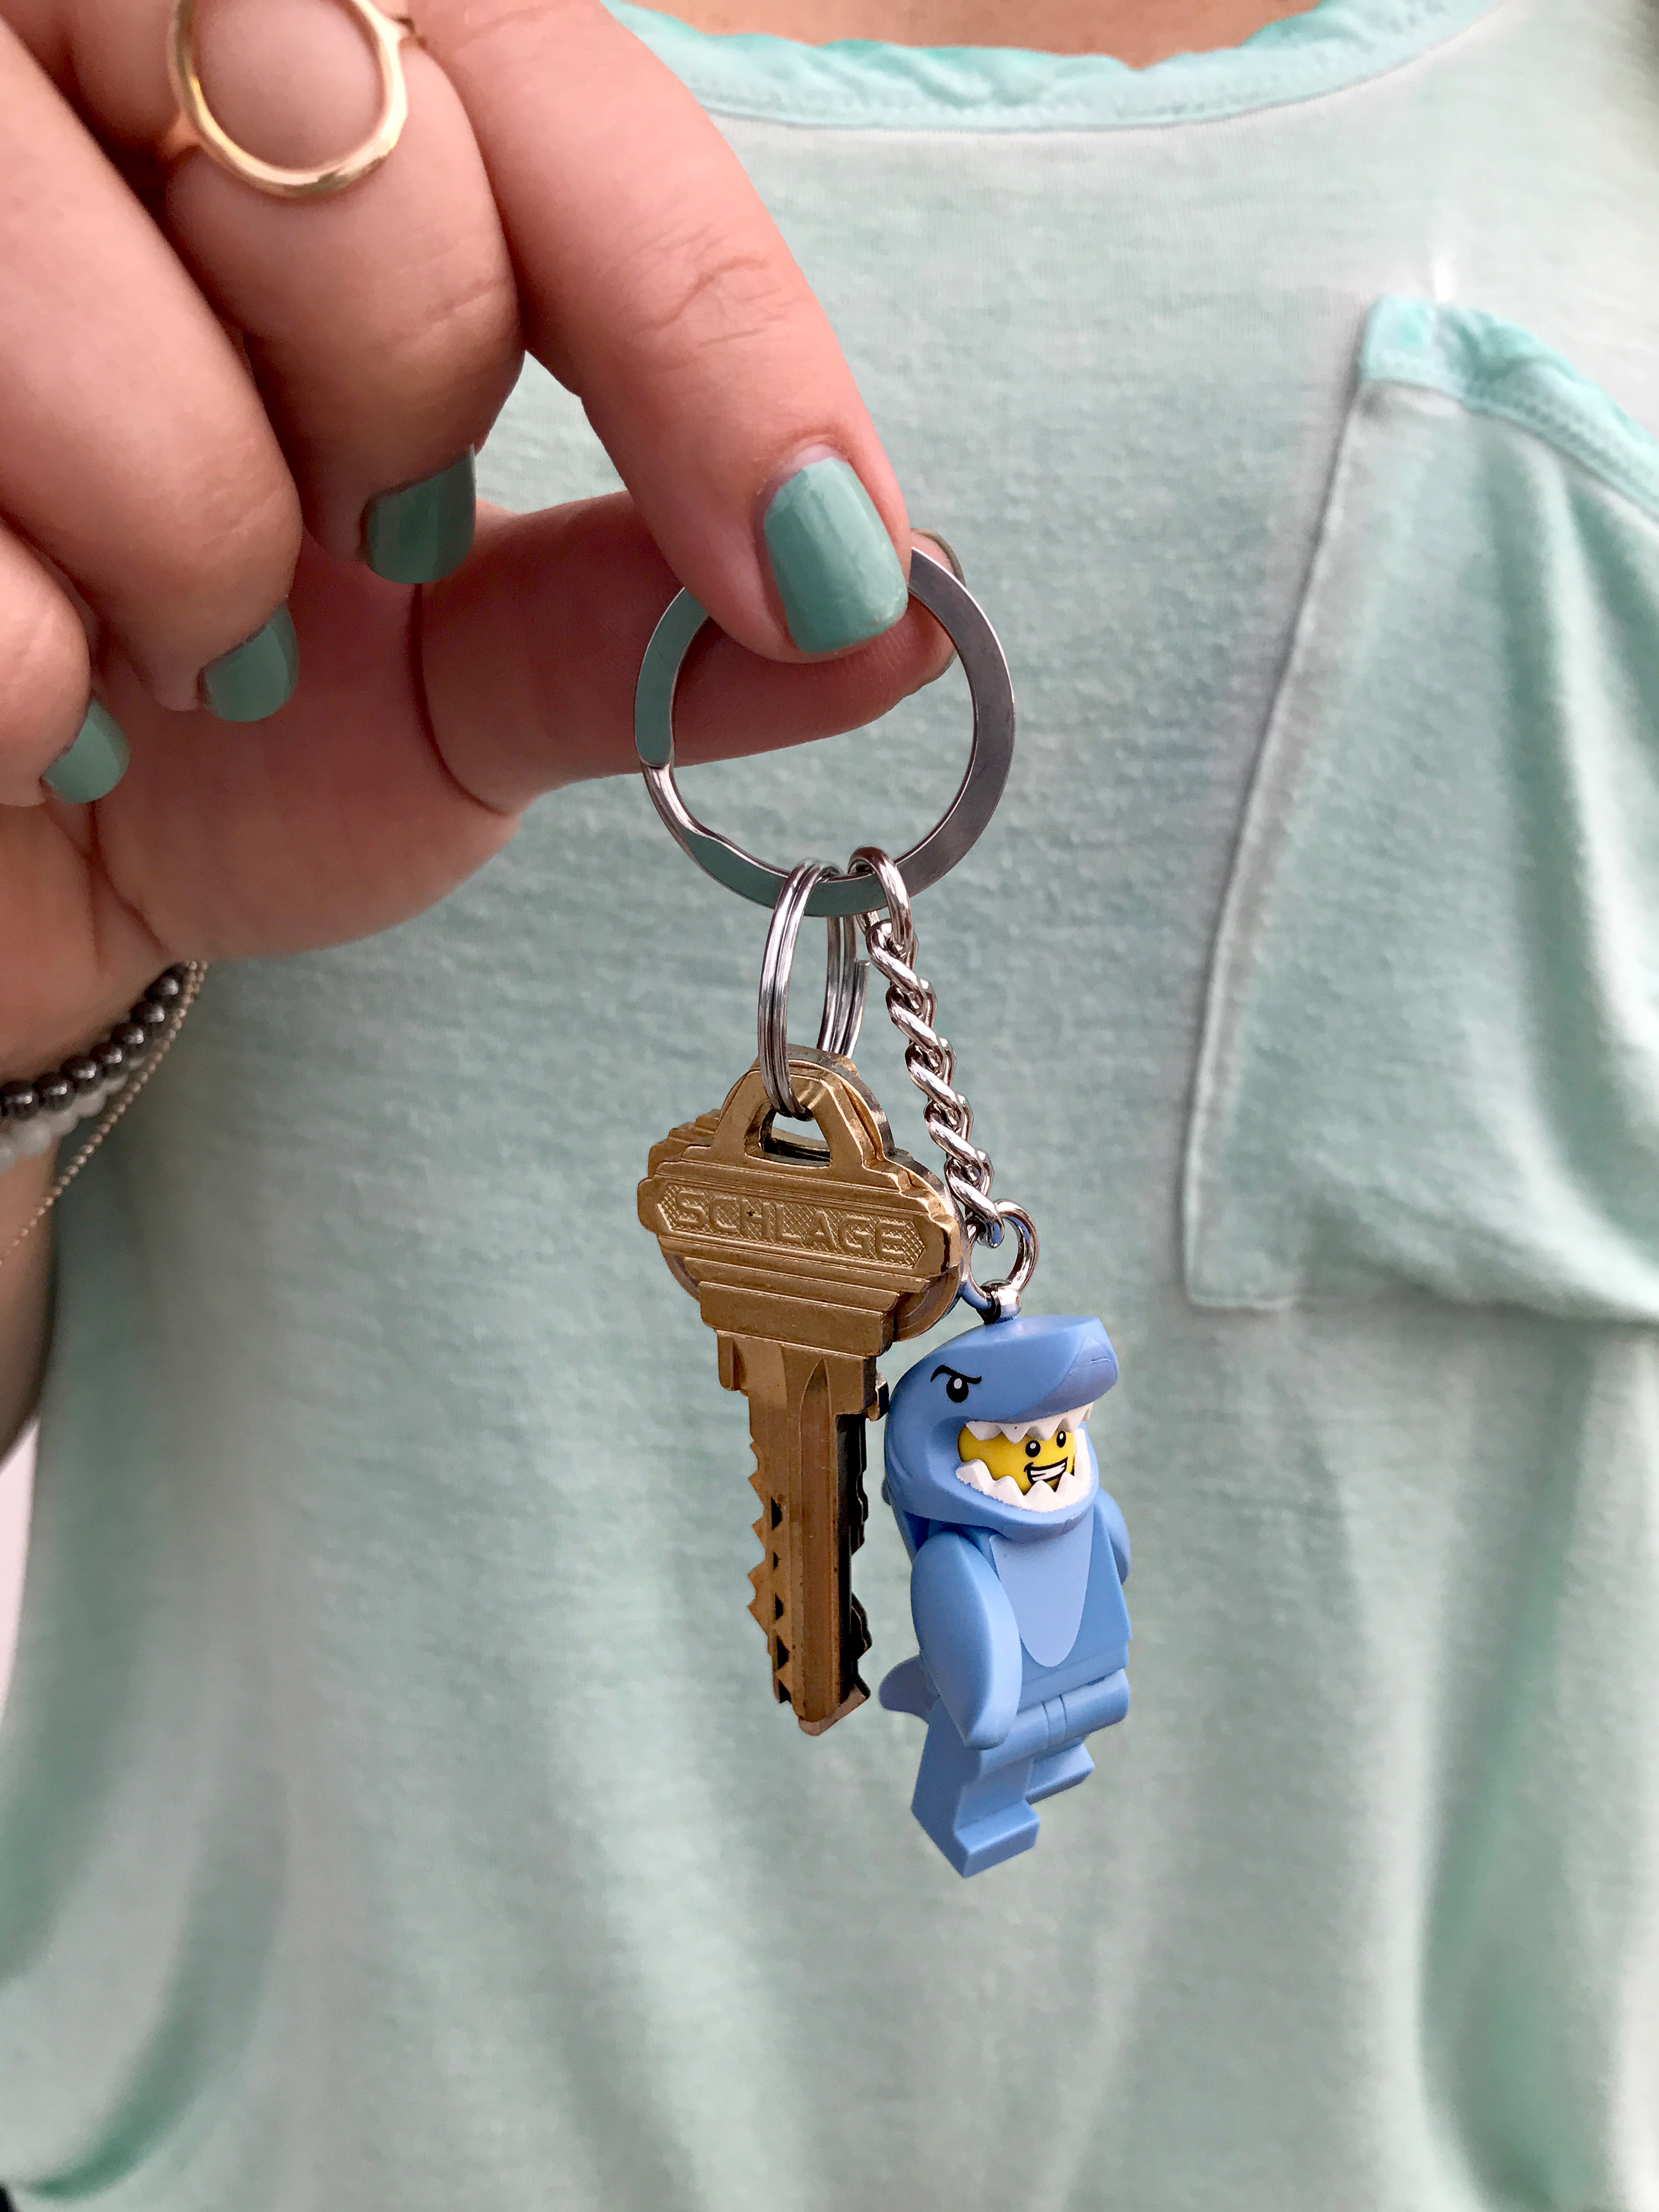 New home, new keys... with a Shark Man lego keychain, of course!